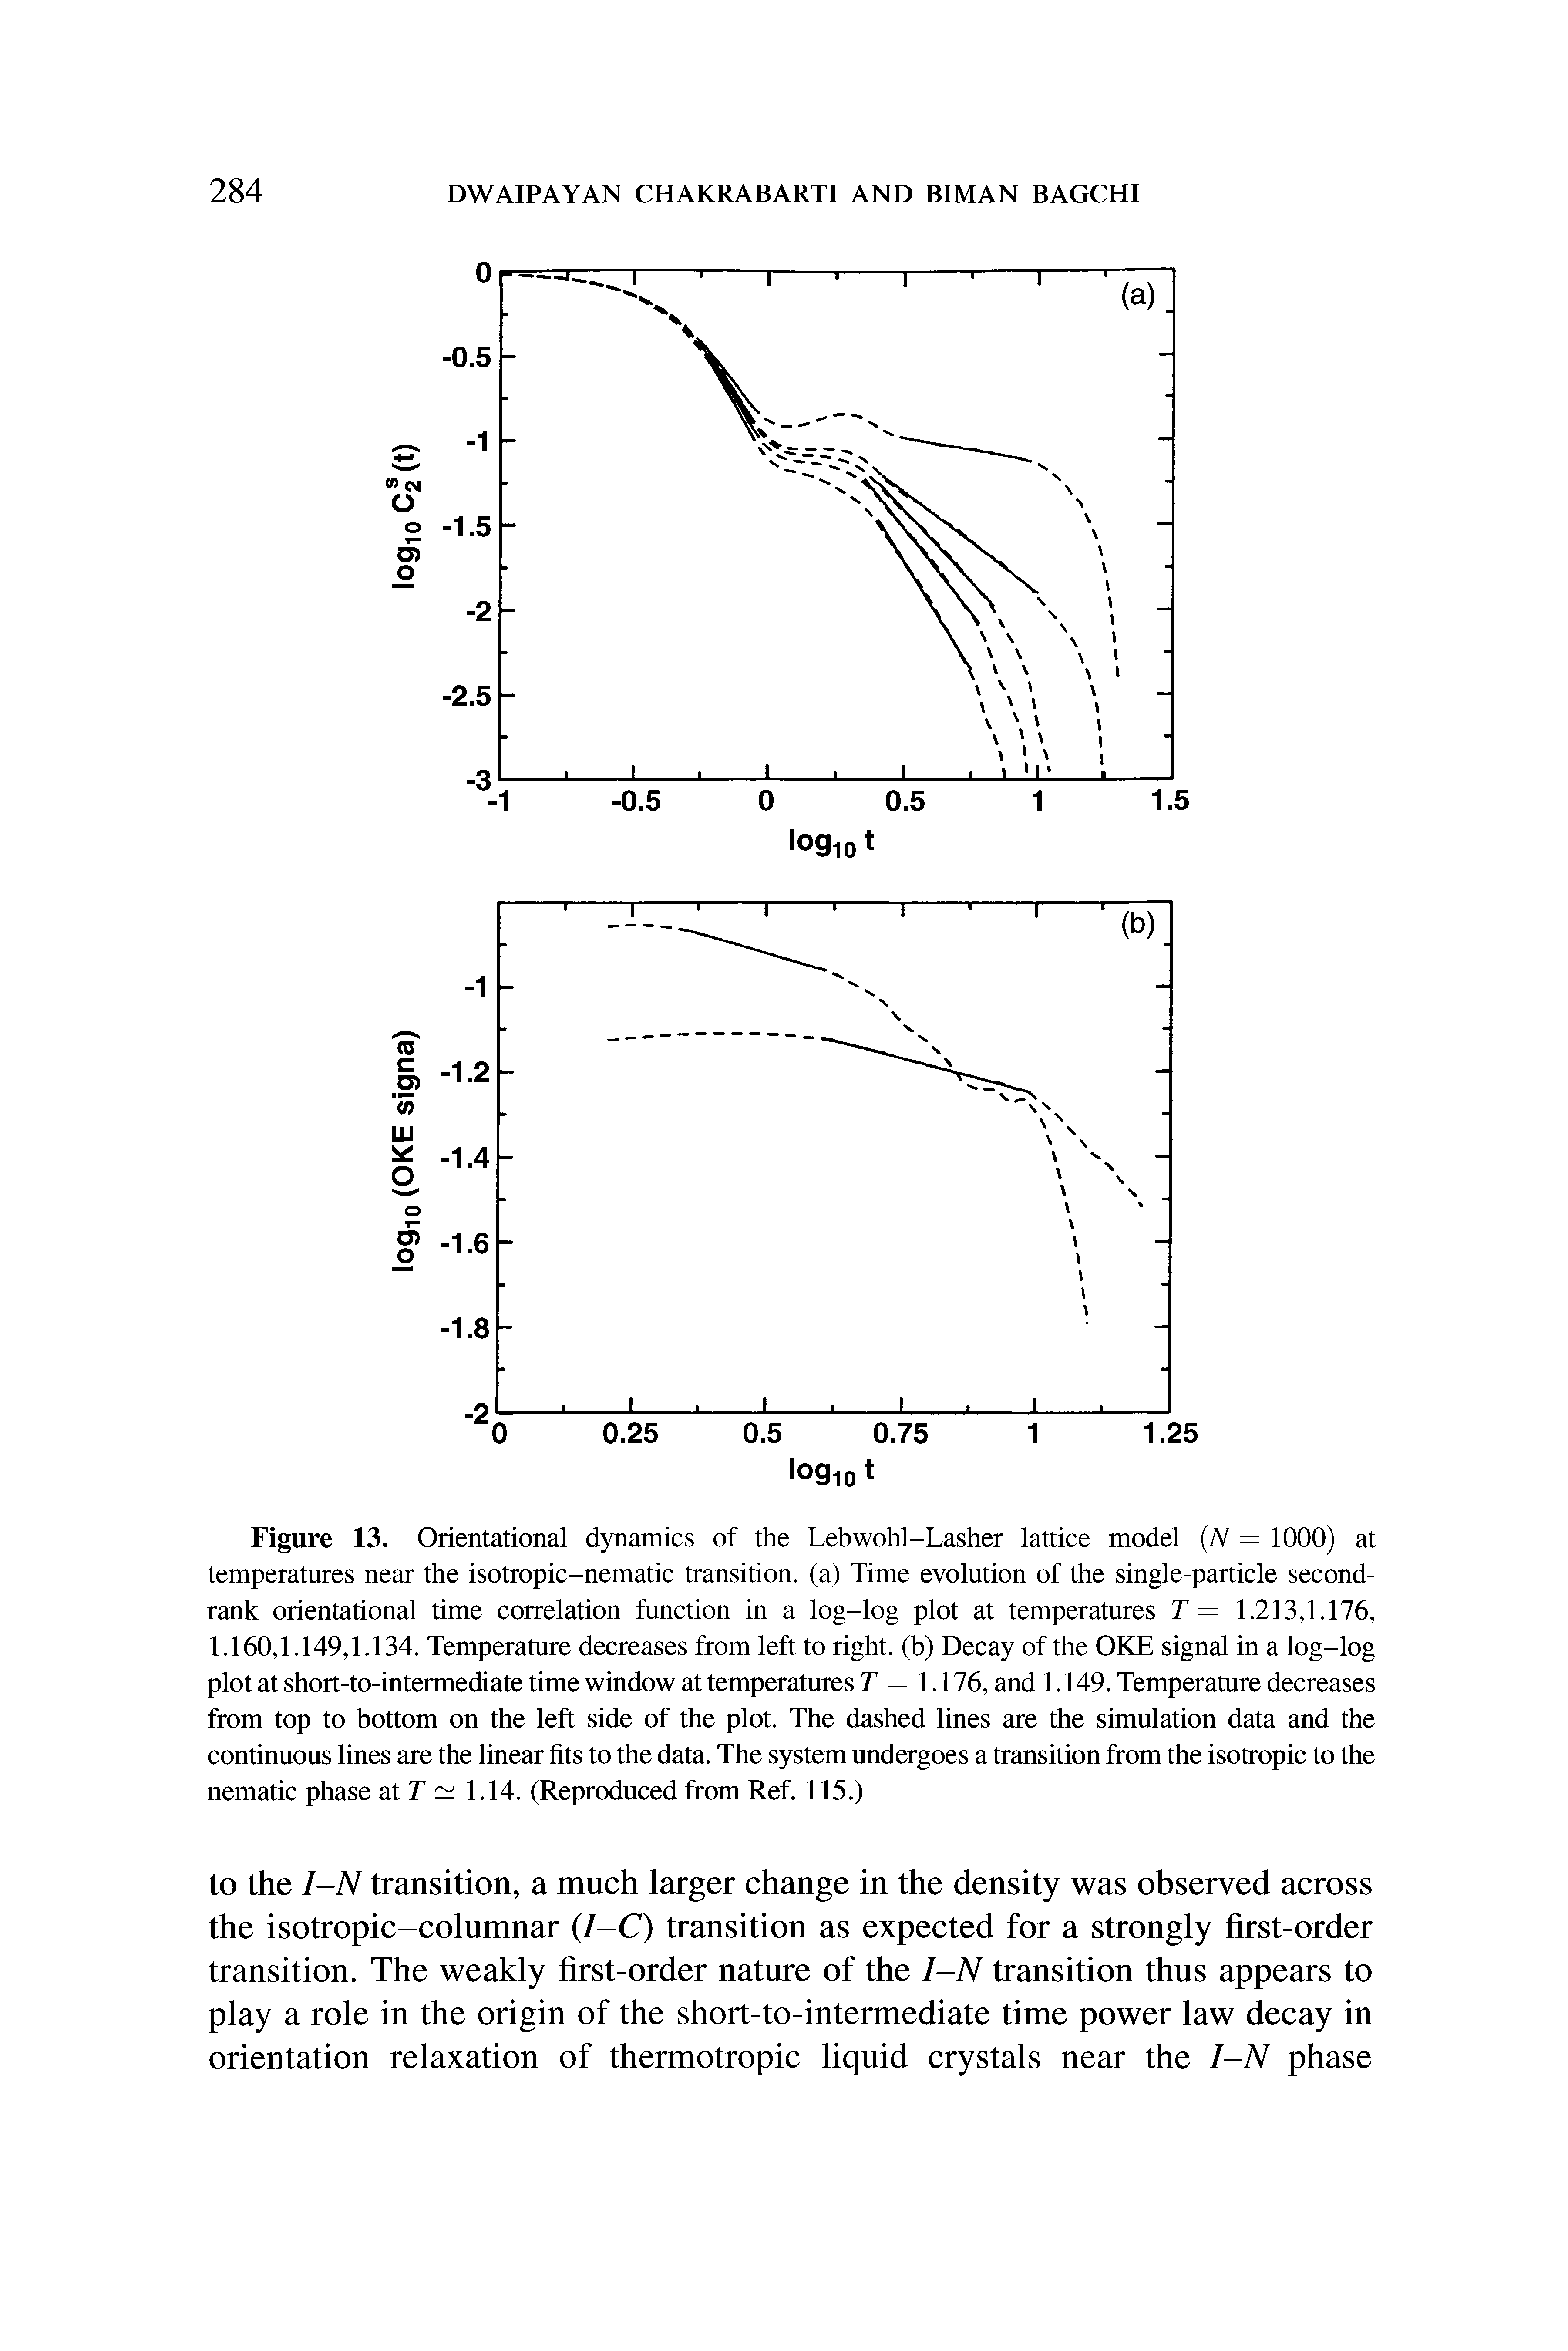 Figure 13. Orientational dynamics of the Lebwohl-Lasher lattice model (N = 1000) at temperatures near the isotropic-nematic transition, (a) Time evolution of the single-particle second-rank orientational time correlation function in a log-log plot at temperatures T = 1.213,1.176, 1.160,1.149,1.134. Temperature decreases from left to right, (b) Decay of the OKE signal in a log-log plot at short-to-intermediate time window at temperatures T = 1.176, and 1.149. Temperature decreases from top to bottom on the left side of the plot. The dashed lines are the simulation data and the continuous lines are the linear fits to the data. The system undergoes a transition from the isotropic to the nematic phase at T 1.14. (Reproduced from Ref. 115.)...